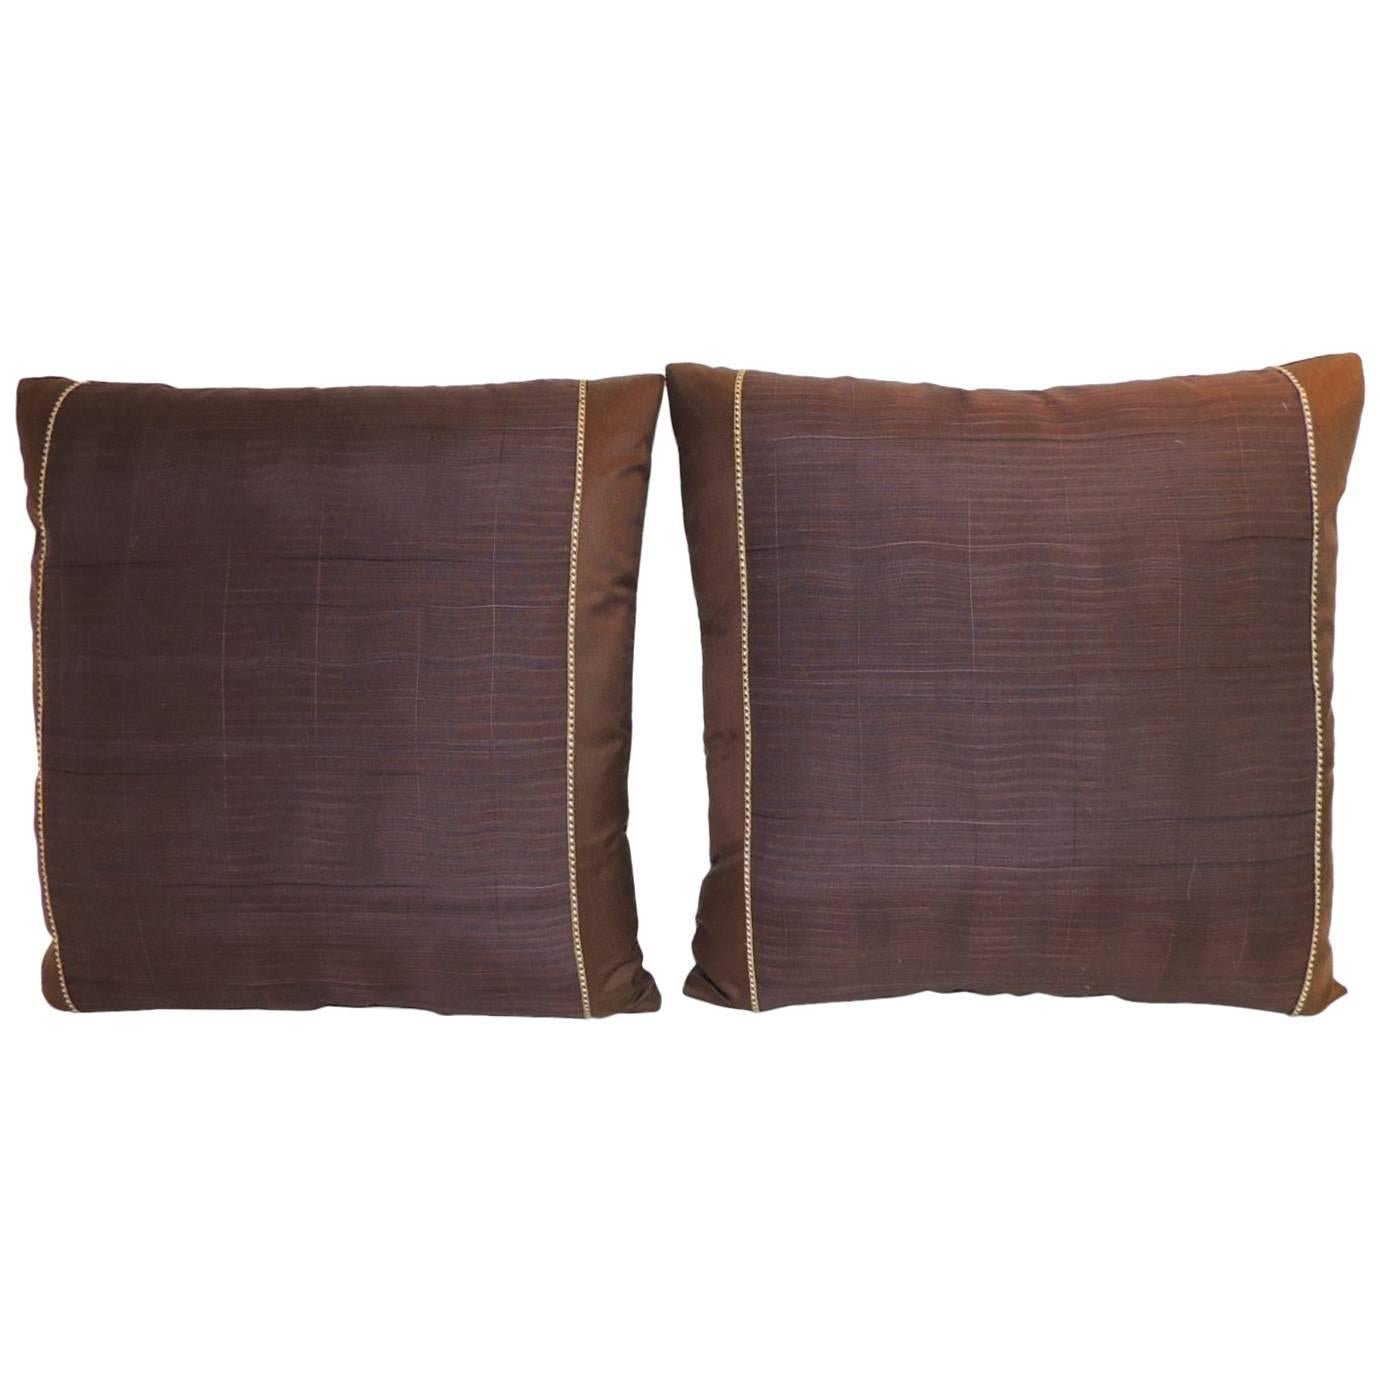 Pair of Vintage Brown and Purple Obi Woven Decorative Pillows